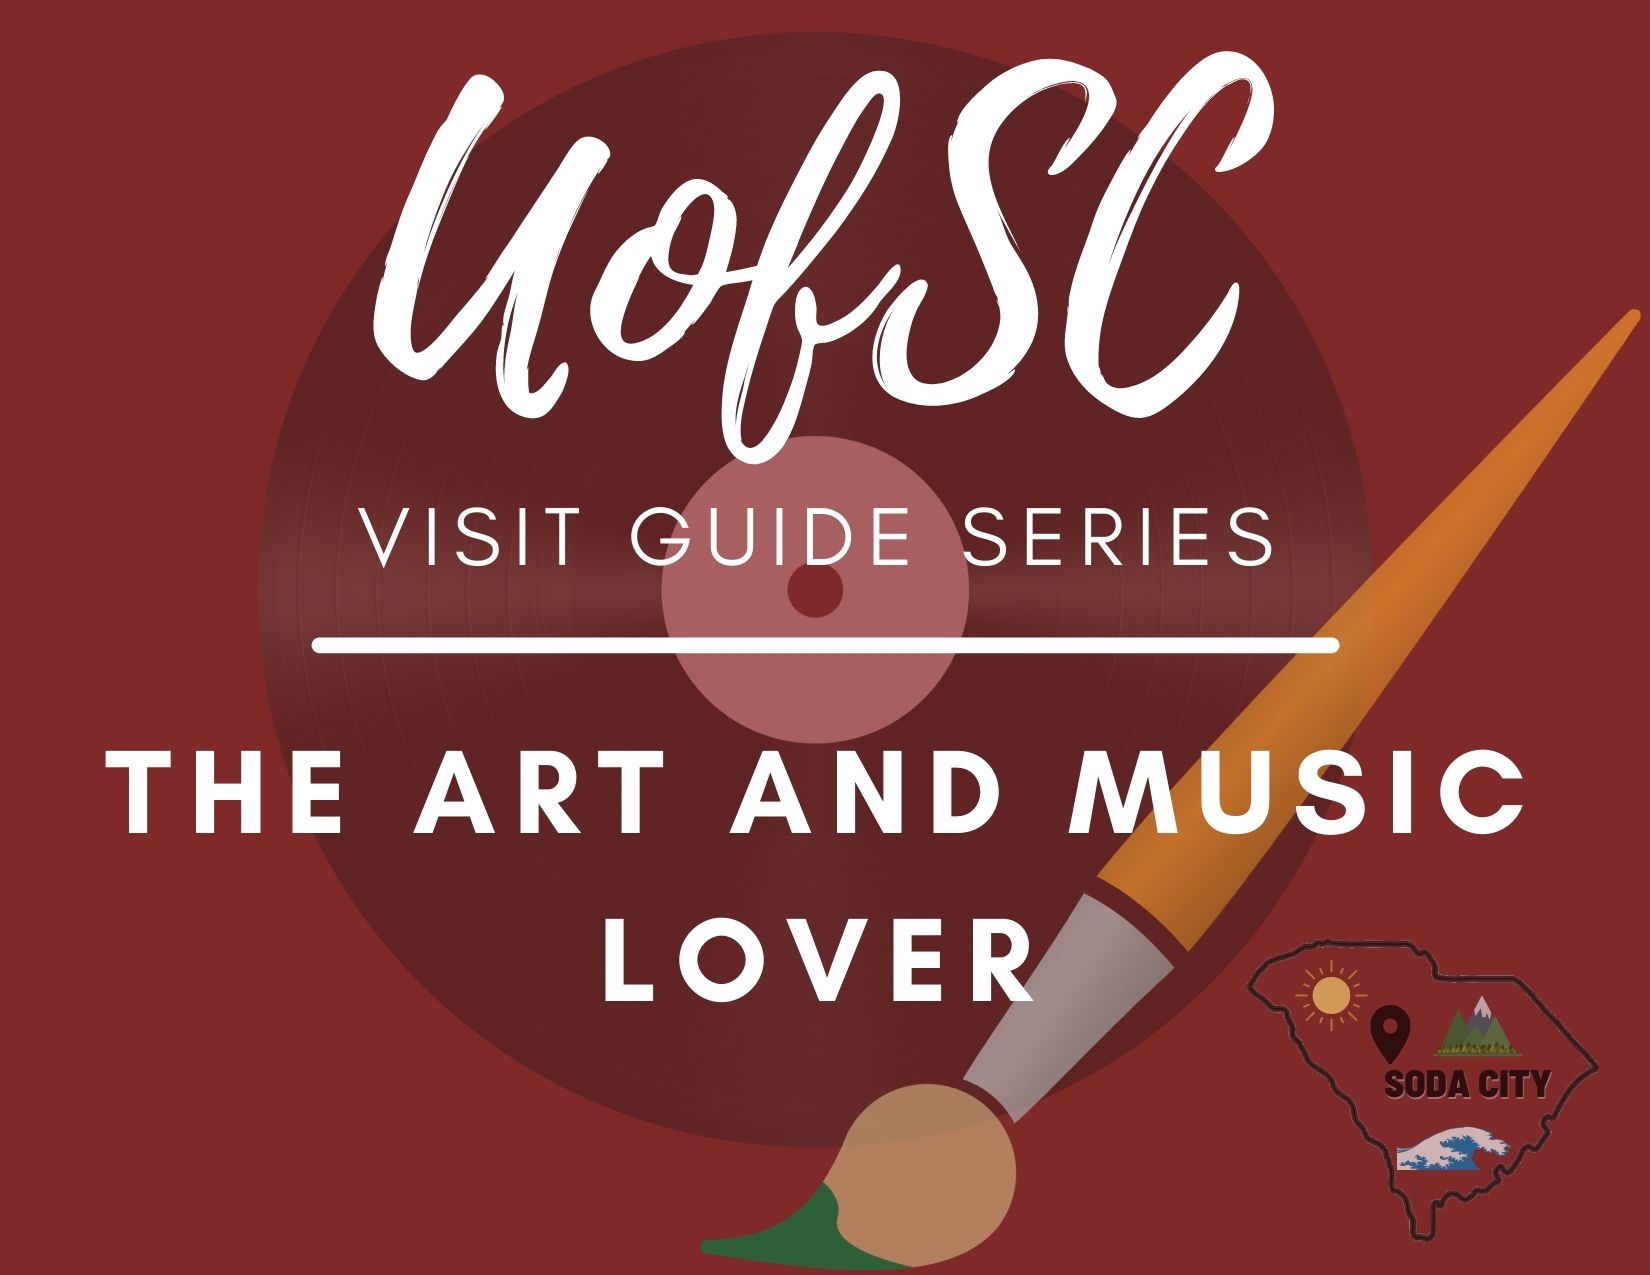 UofSC Visit Guide Series The Art and Music Lover